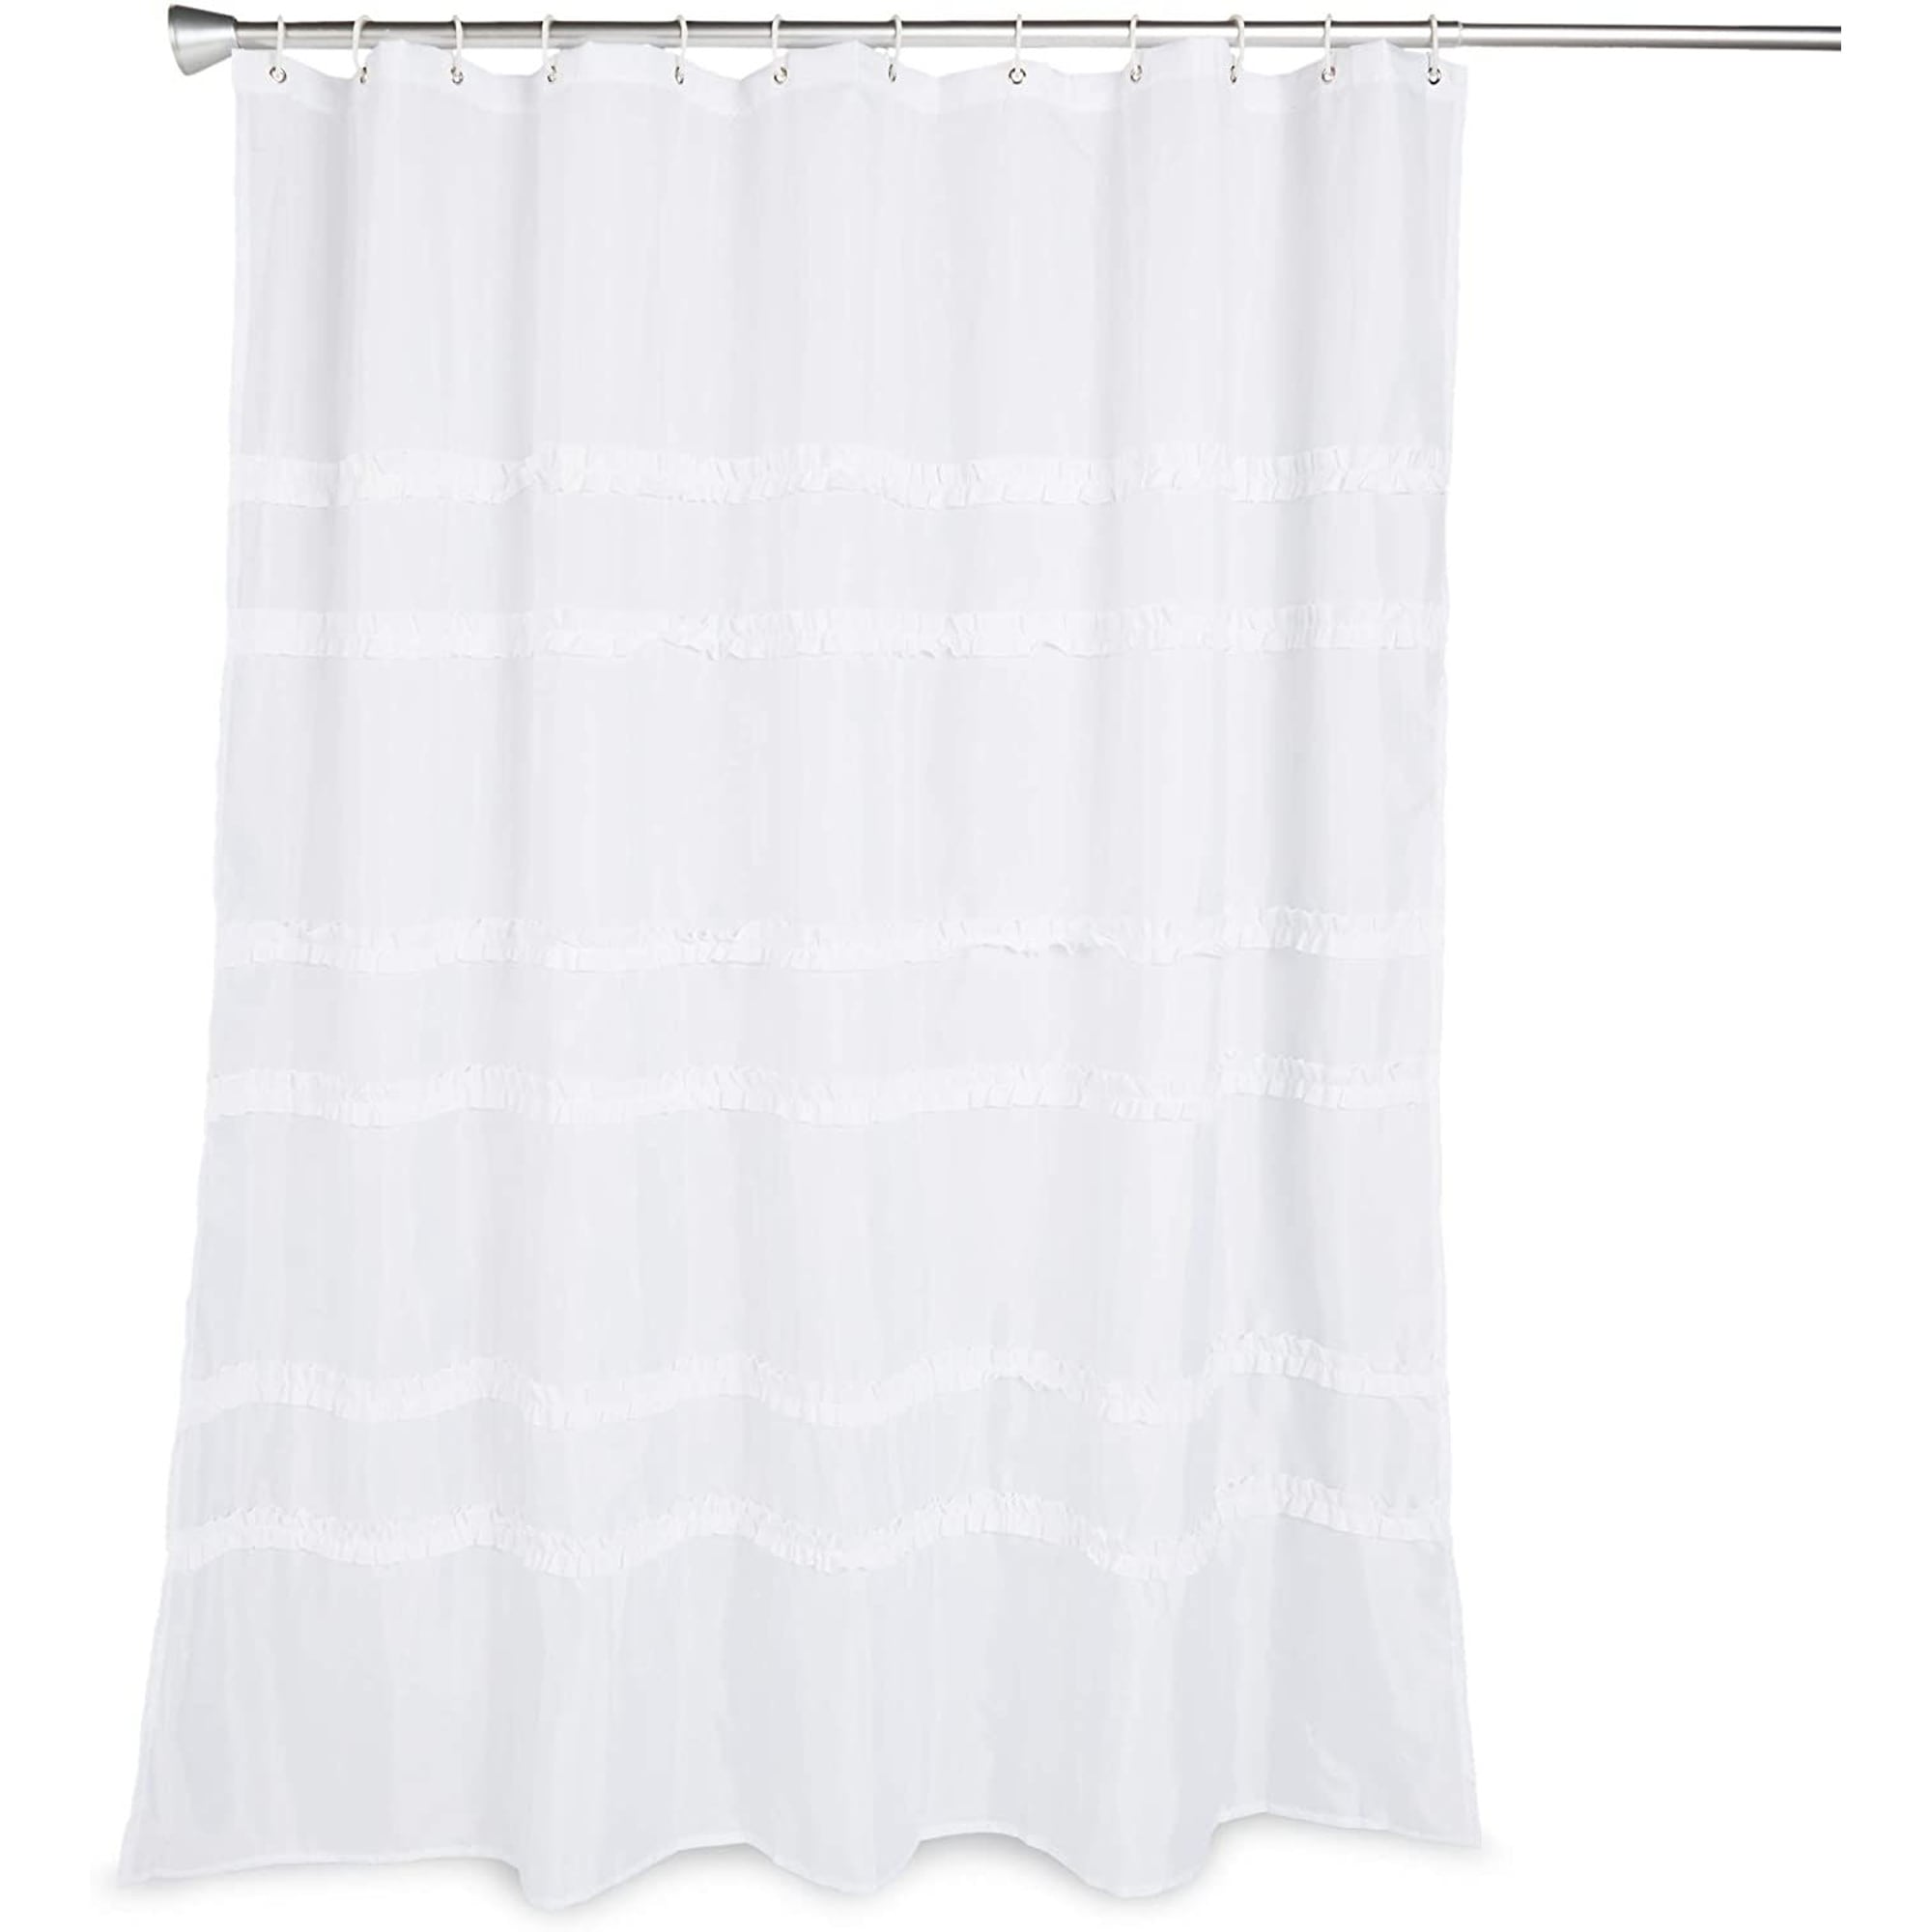 https://ak1.ostkcdn.com/images/products/is/images/direct/d9696605104bd3ac16c302fed44d3b834e35c63d/Farmhouse-Shower-Curtain-Set-with-12-Hooks%2C-Rustic-Bathroom-Decor-%2872-x-72-in%29.jpg